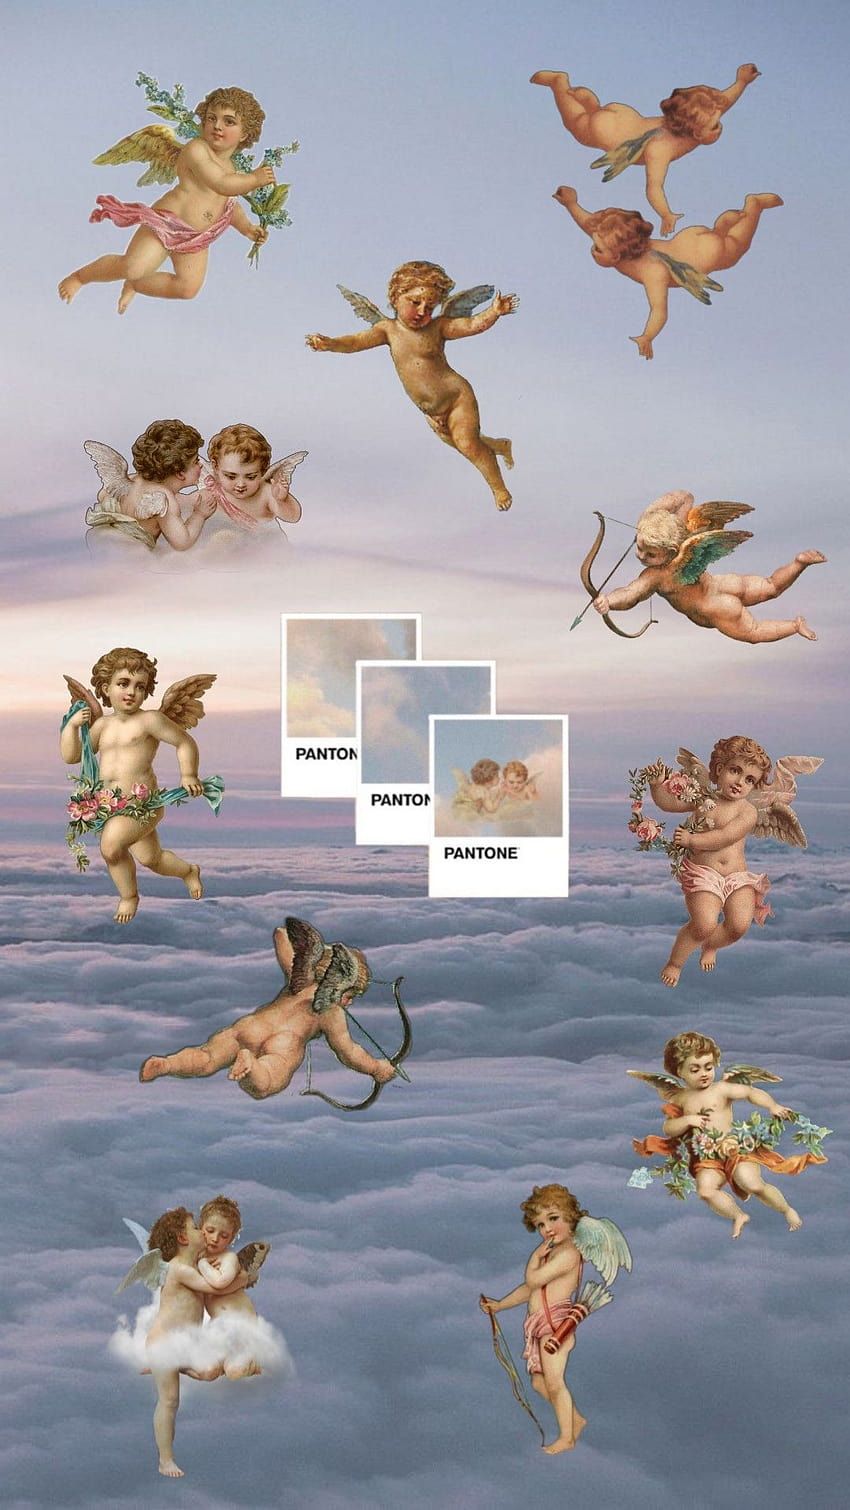 A collage of angels flying in the sky - Cupid